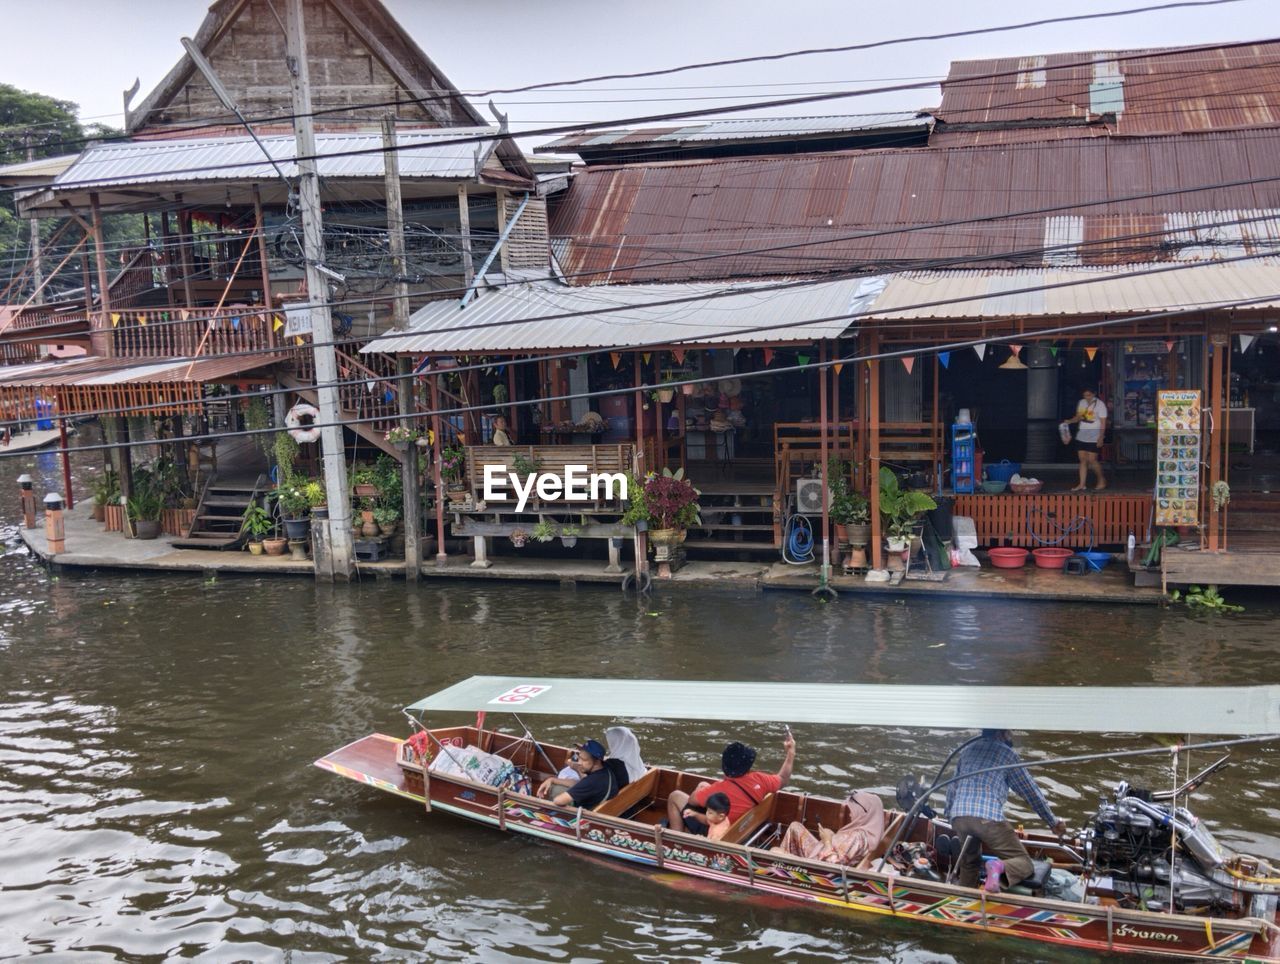 water, nautical vessel, transportation, architecture, boat, built structure, mode of transportation, building exterior, vehicle, travel, nature, group of people, boating, river, travel destinations, tourism, day, watercraft, building, waterway, stilt house, men, outdoors, adult, lifestyles, crowd, city, tradition, trip, vacation, tourist, house, large group of people